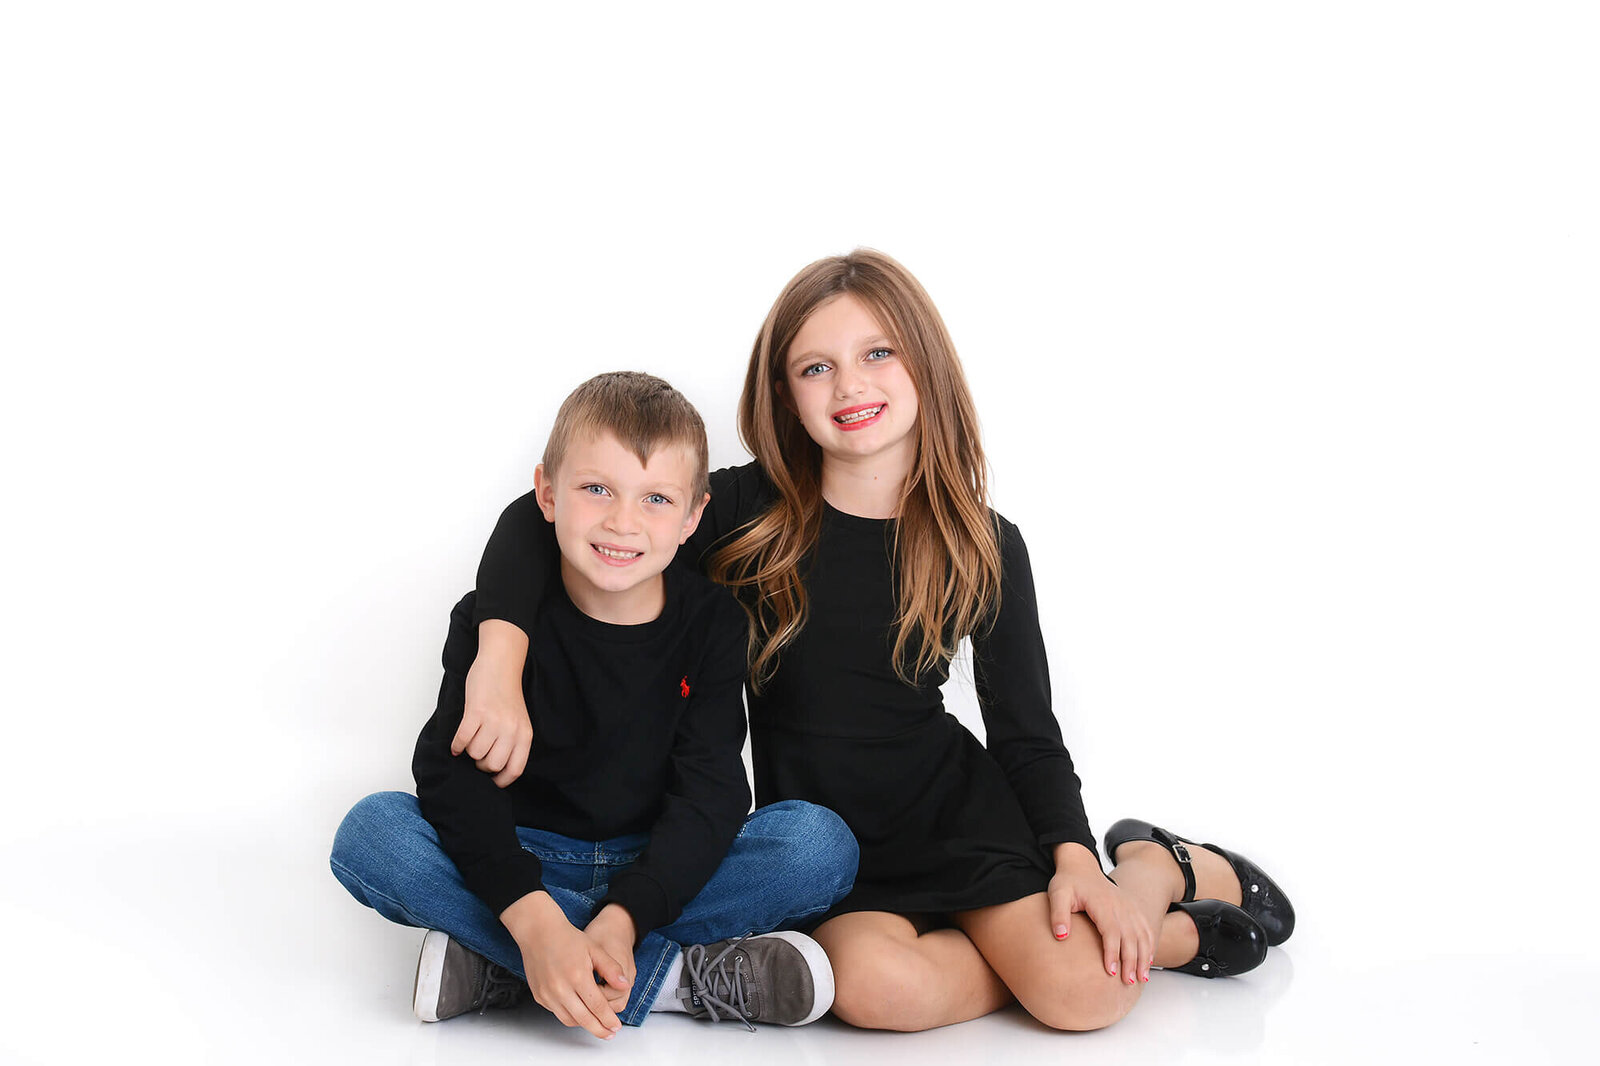 siblings cuddle up and smile at the camera at a photoshoot